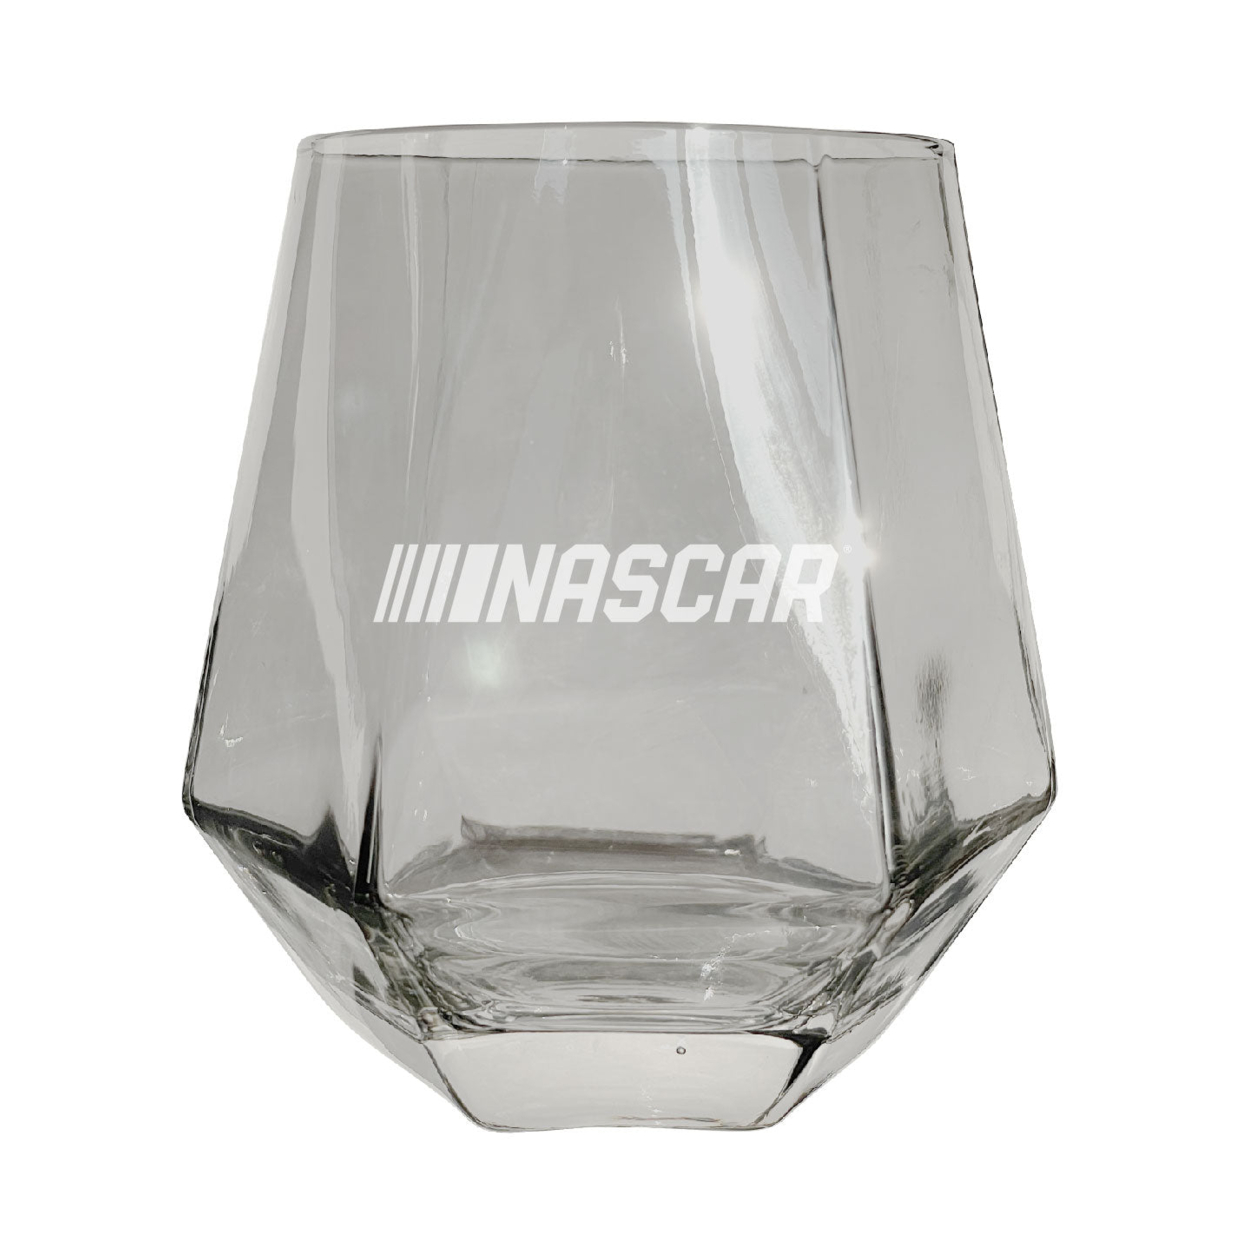 NASCAR Officially Licensed 10 Oz Engraved Diamond Wine Glass - Clear, 2-Pack